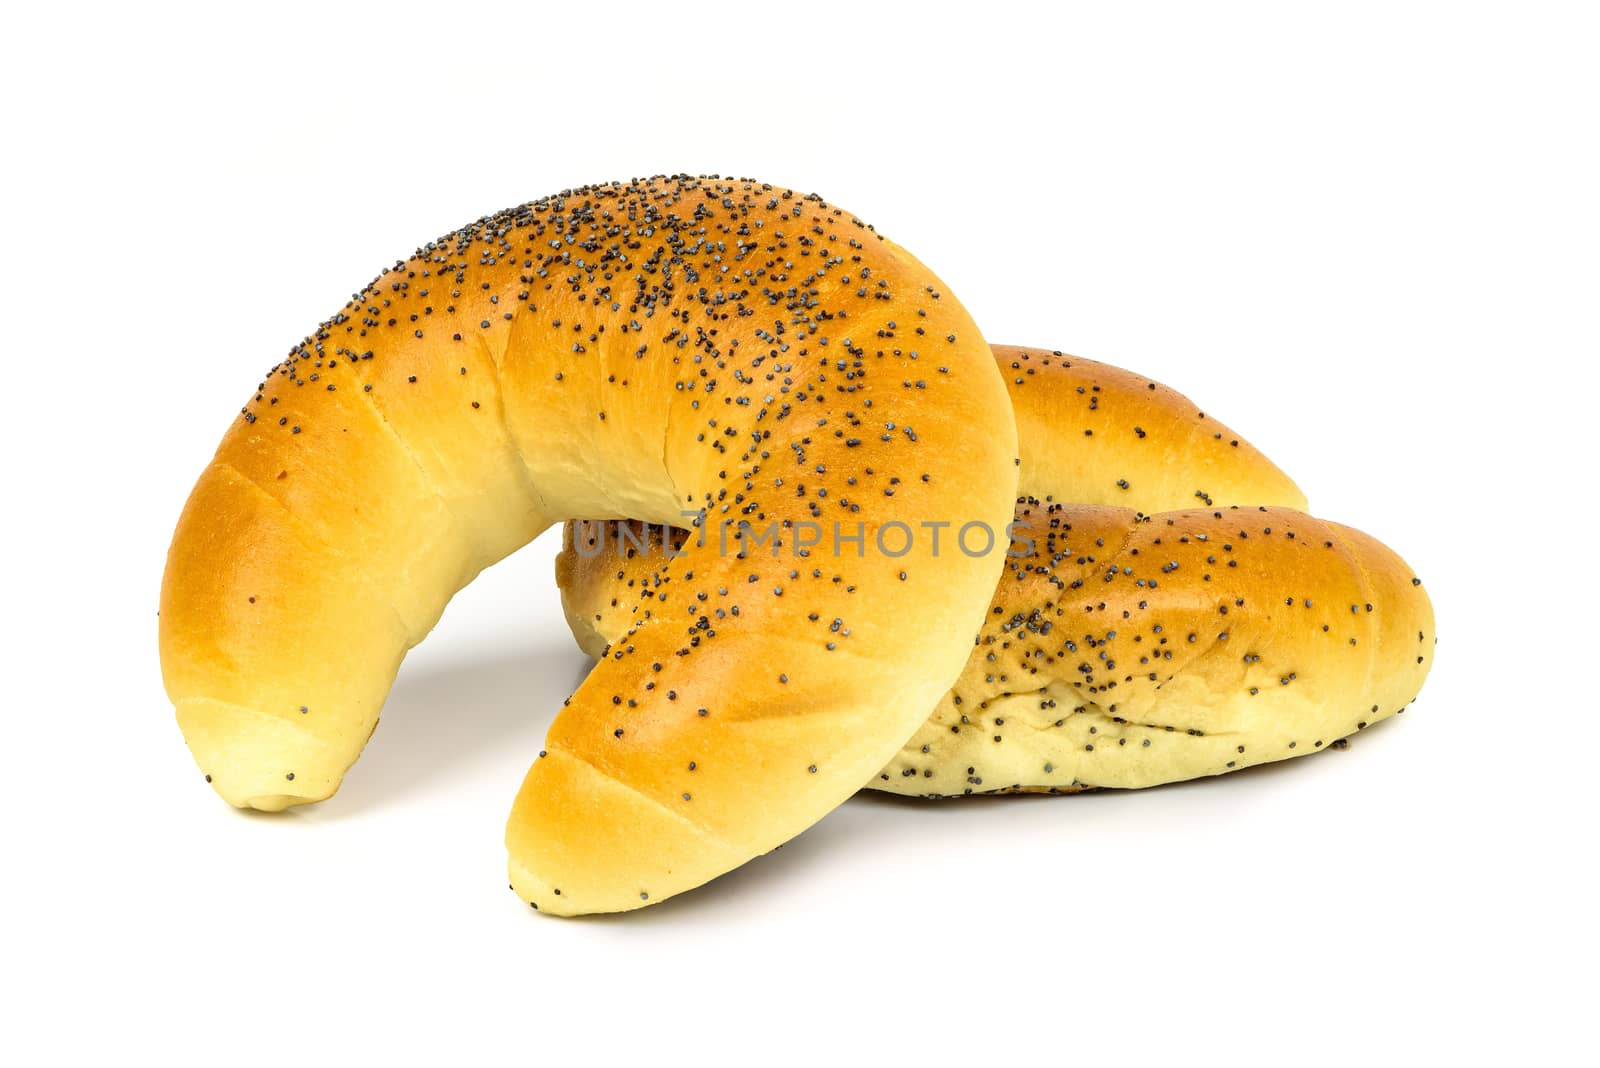 Crescent rolls with poppy seeds on white background by mkos83